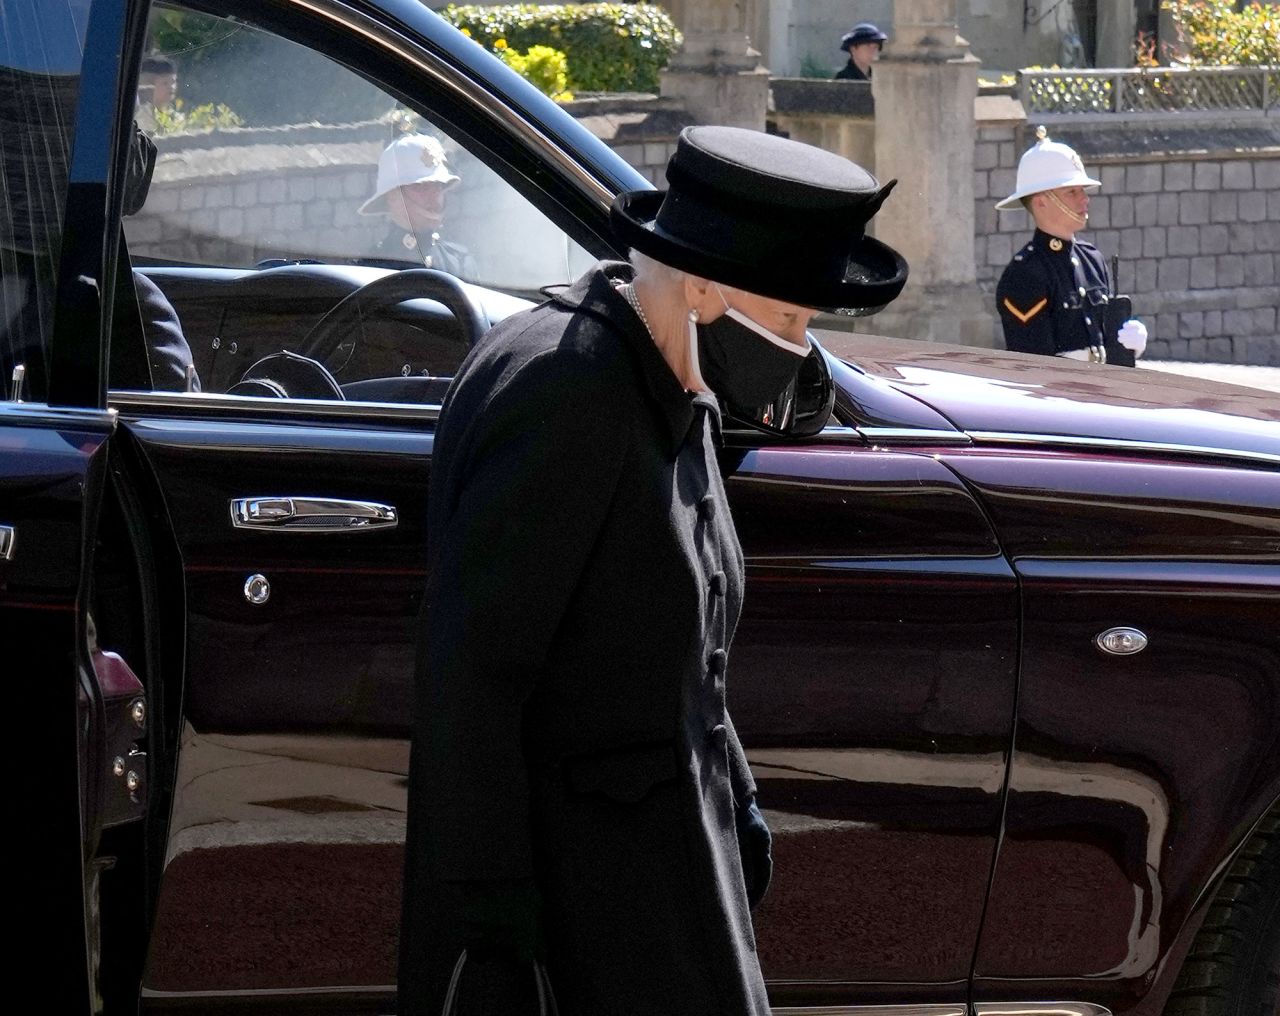 The Queen arrives at St. George's Chapel.